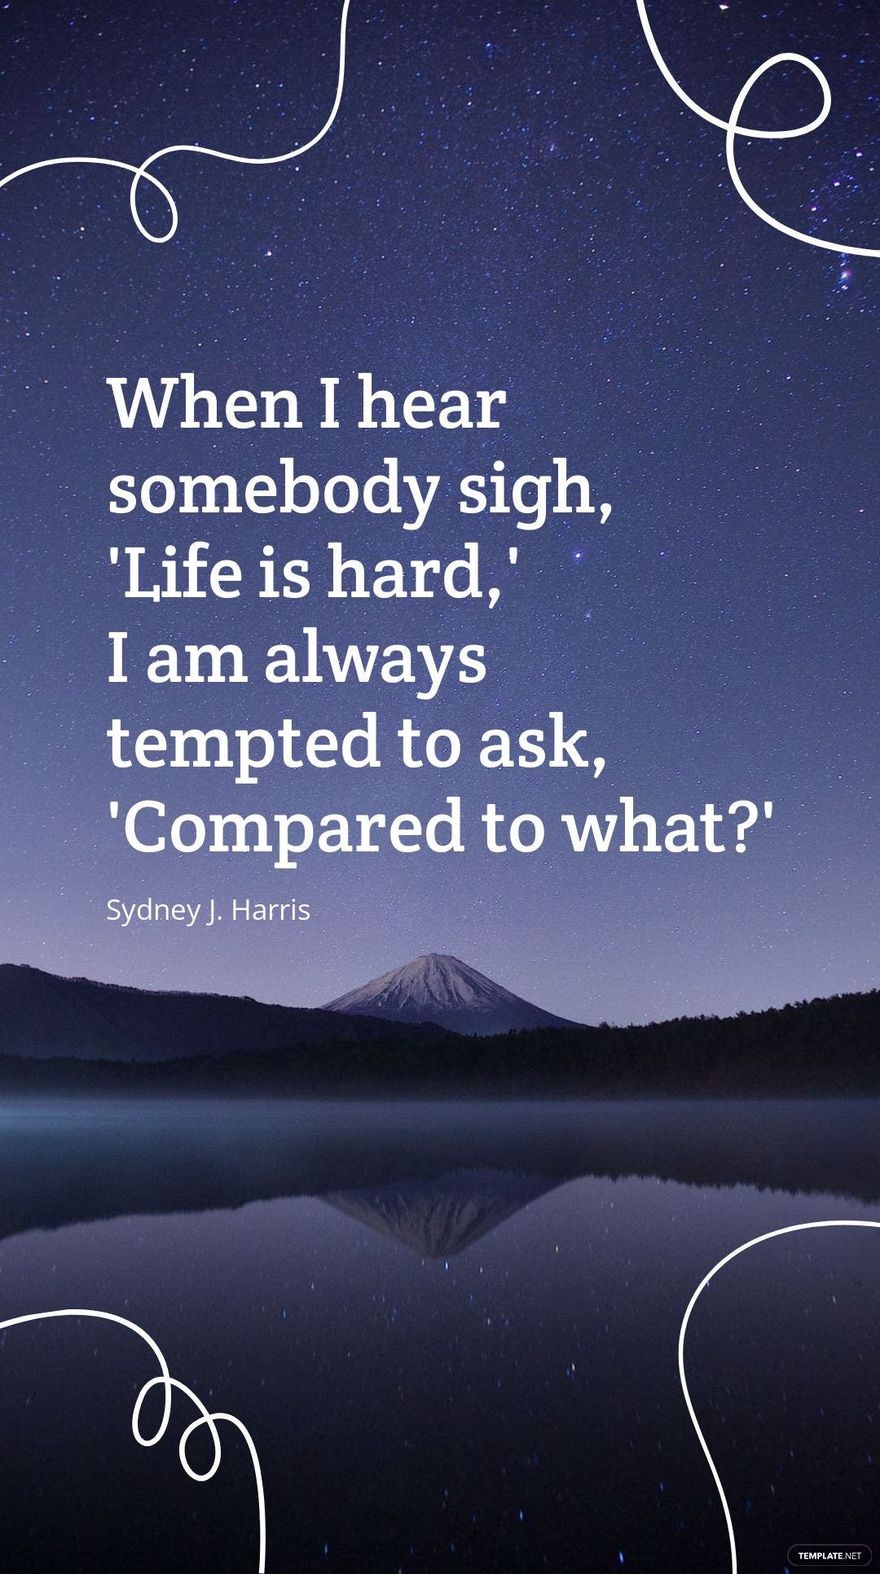 Sydney J. Harris - "When I hear somebody sigh, 'Life is hard,' I am always tempted to ask, 'Compared to what?'"